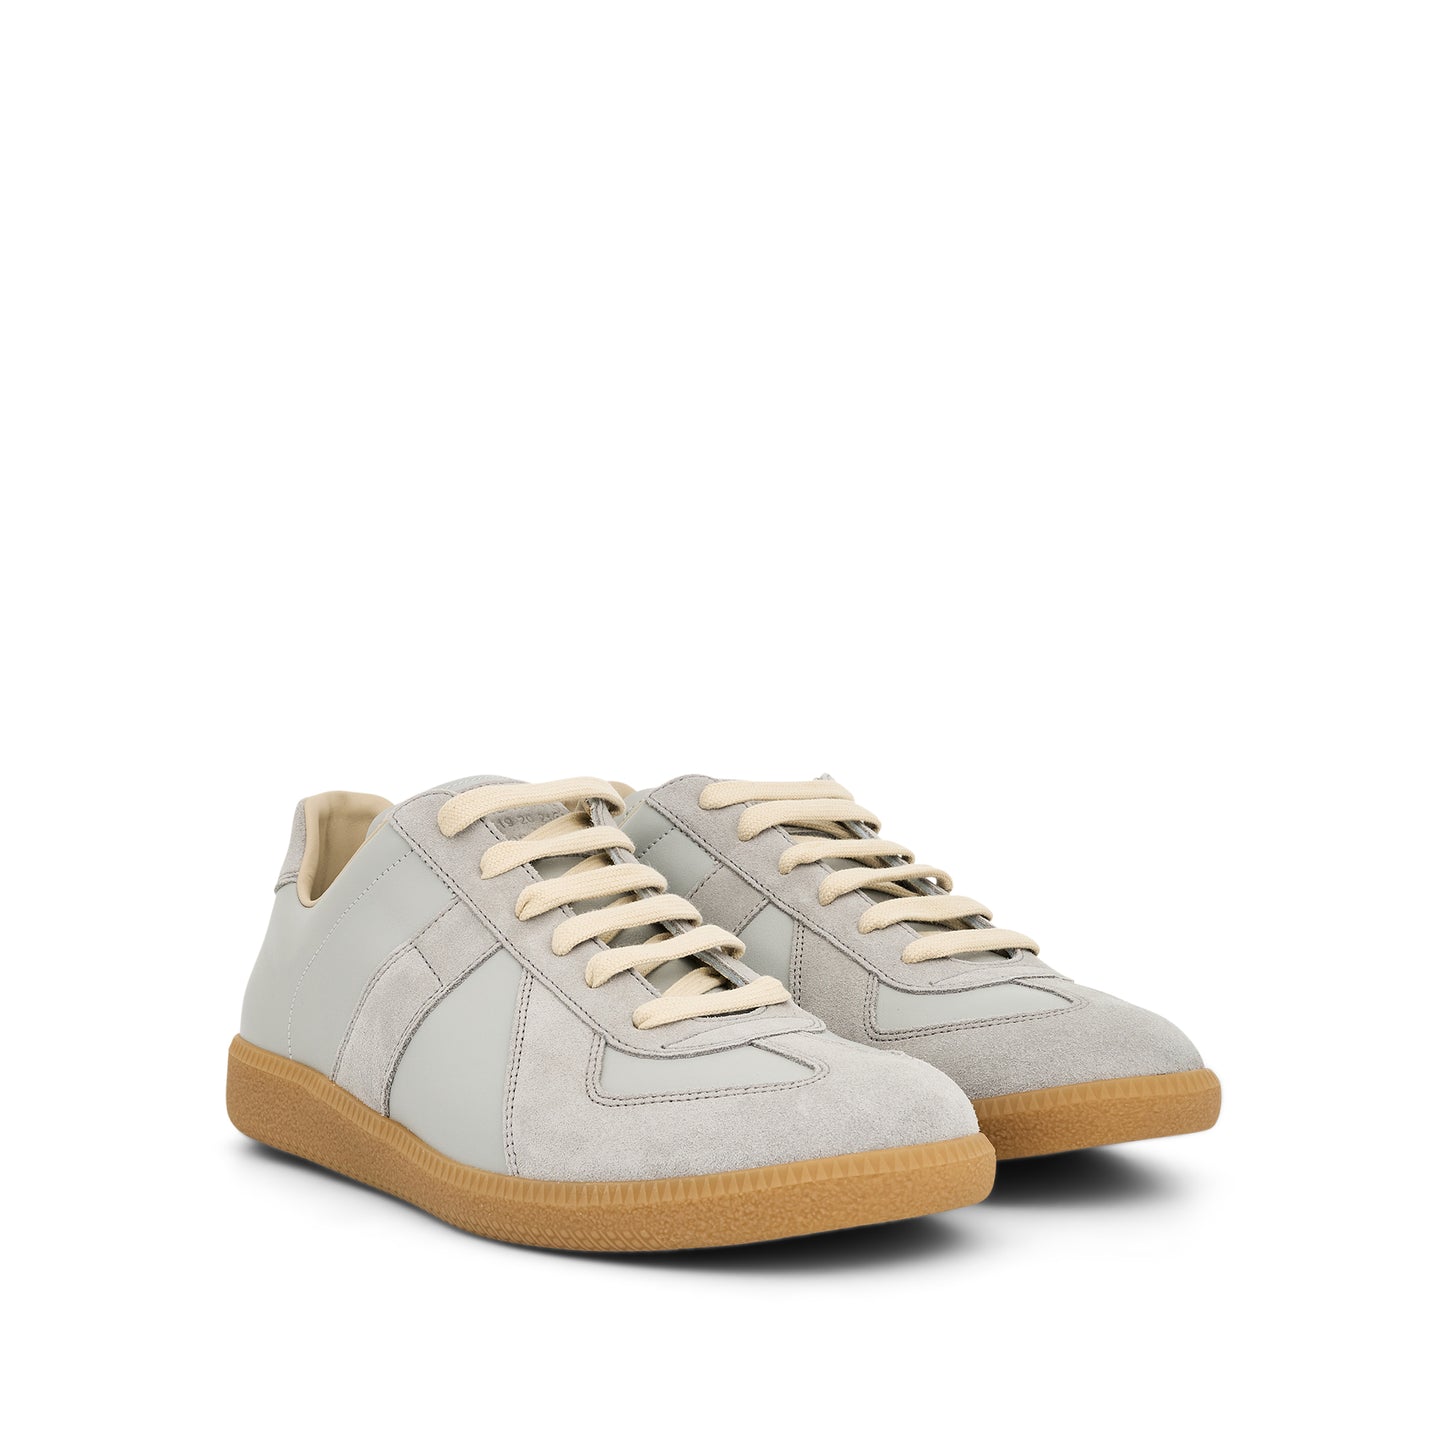 Replica Leather Sneakers in Anisette